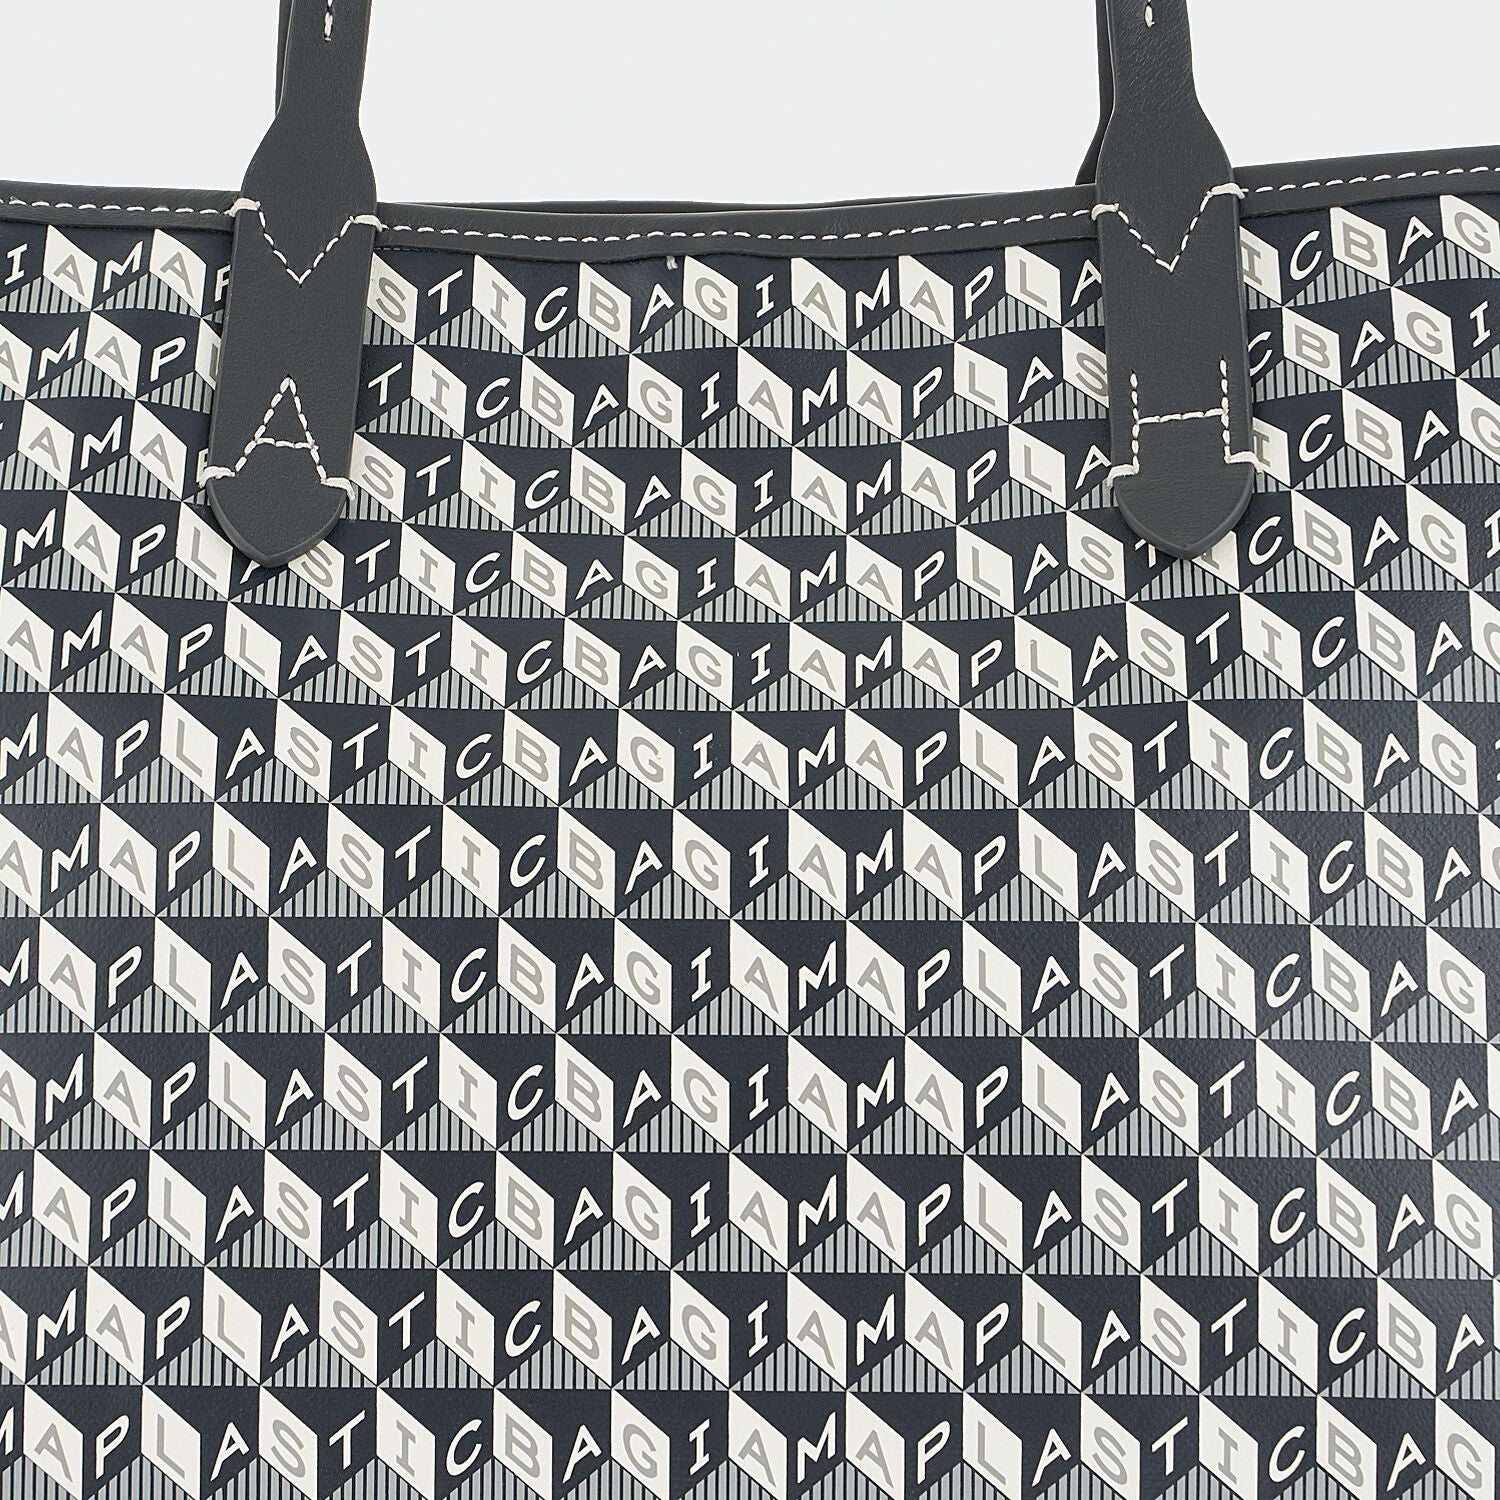 「I AM A Plastic Bag」 スモール トート -

                  
                    Recycled coated canvas in Charcoal -
                  

                  Anya Hindmarch JP
